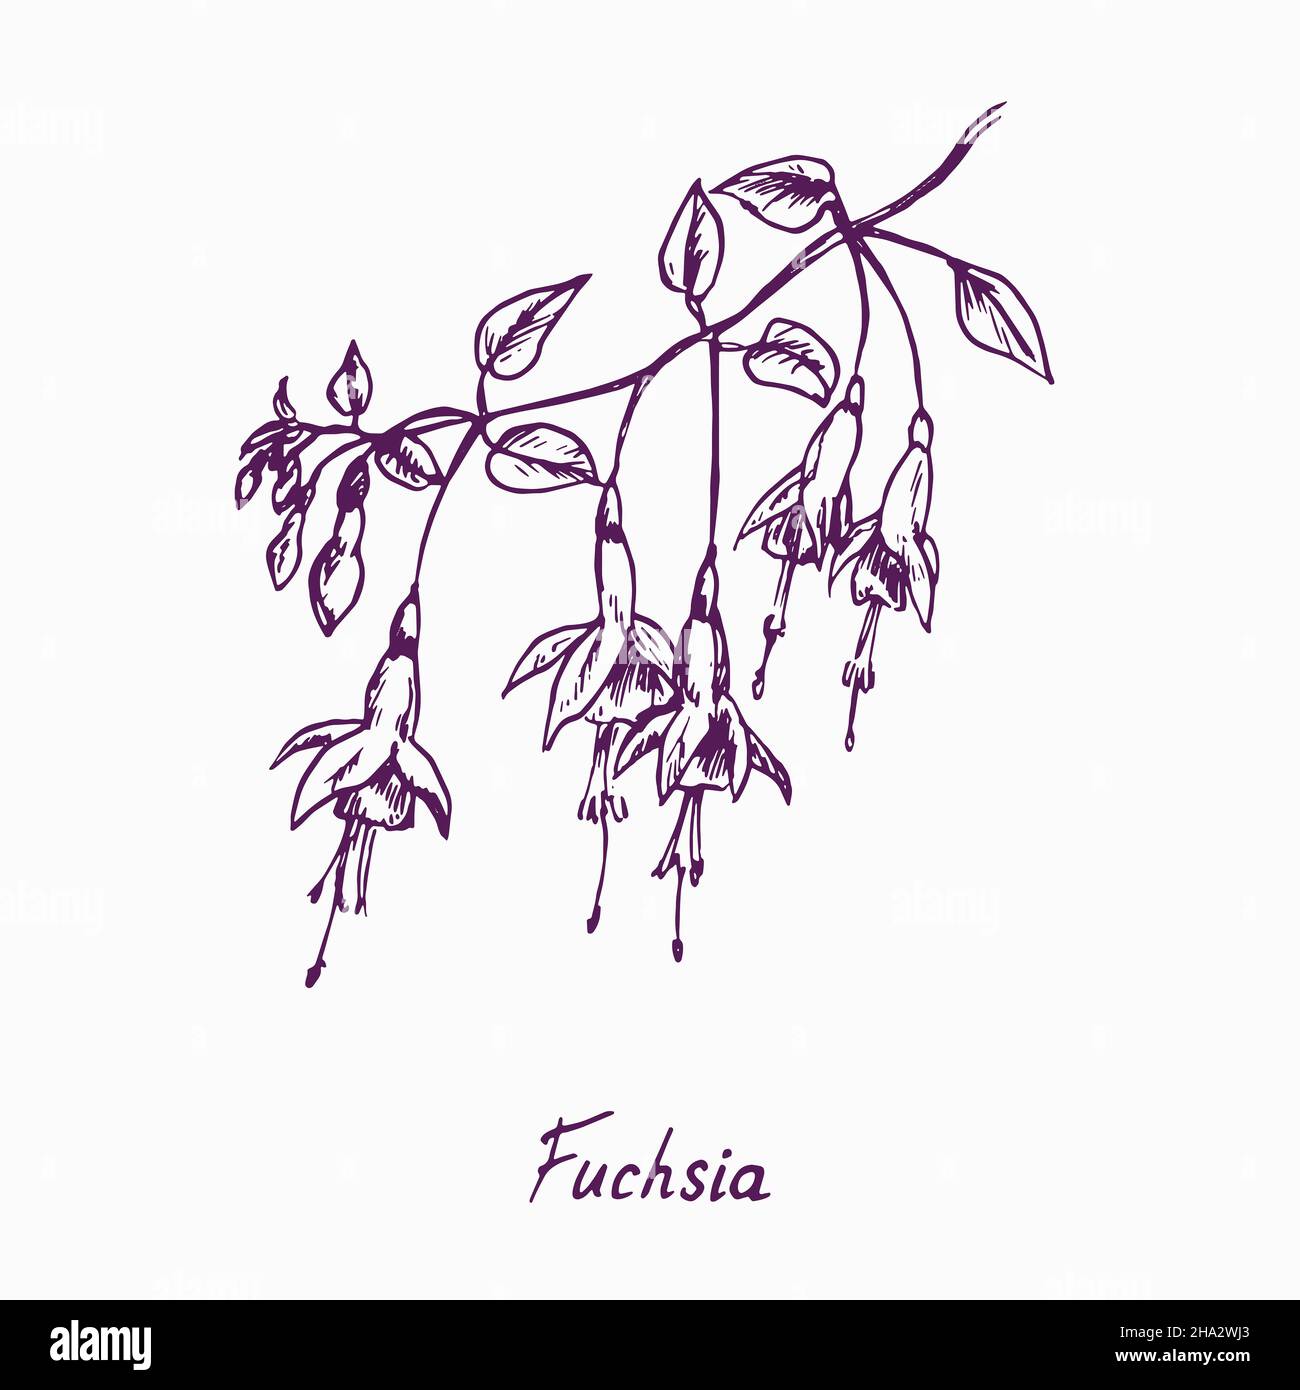 Fuchsia flower twig with bud and leaves, doodle drawing with inscription, vintage style Stock Photo